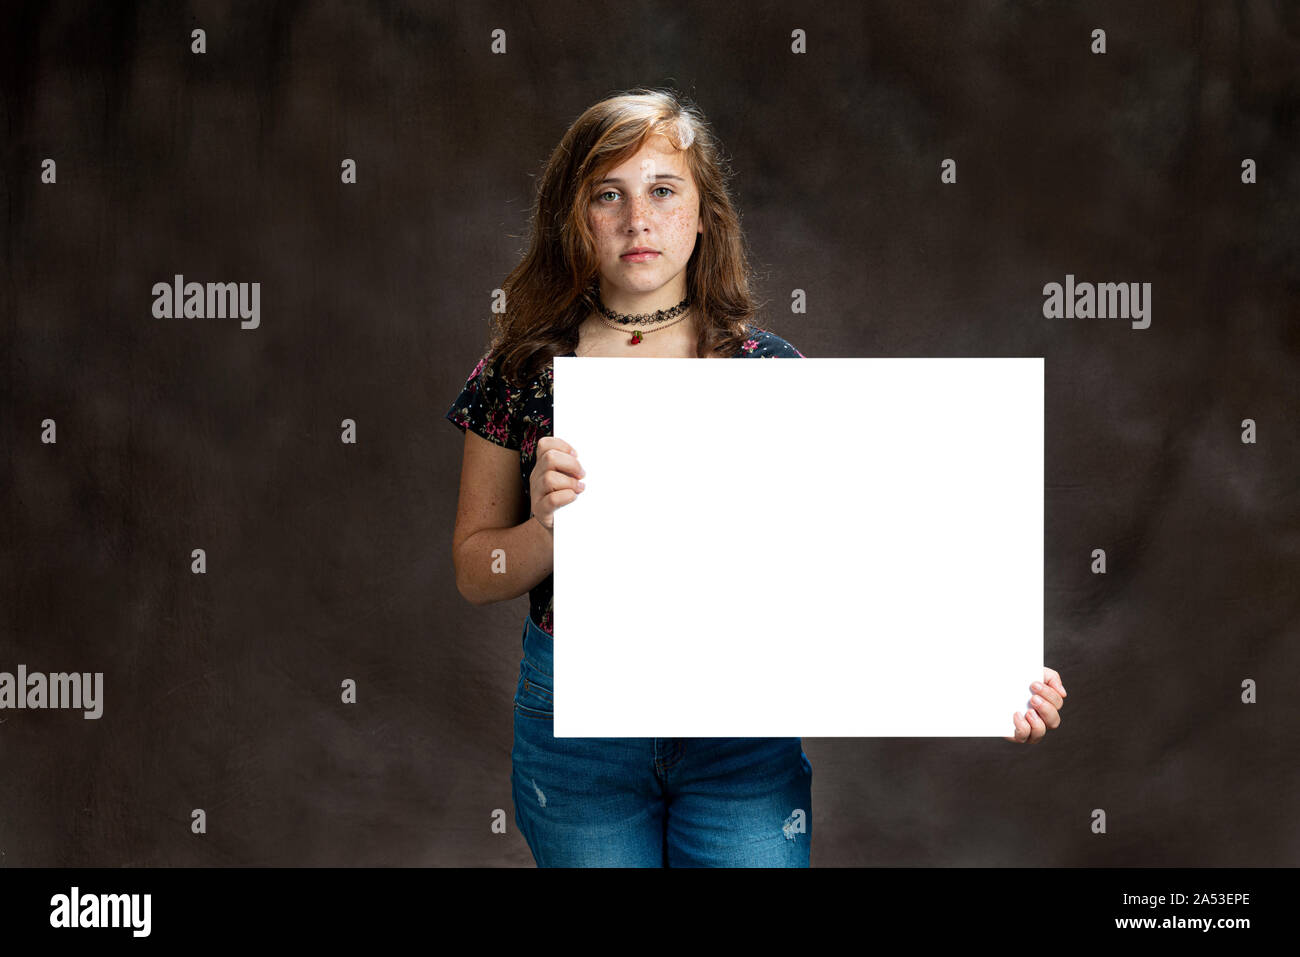 Horizontal studio shot of a serious looking pre-teen girl with freckles holding a blank white sign.  Brown background.  Copy space. Stock Photo